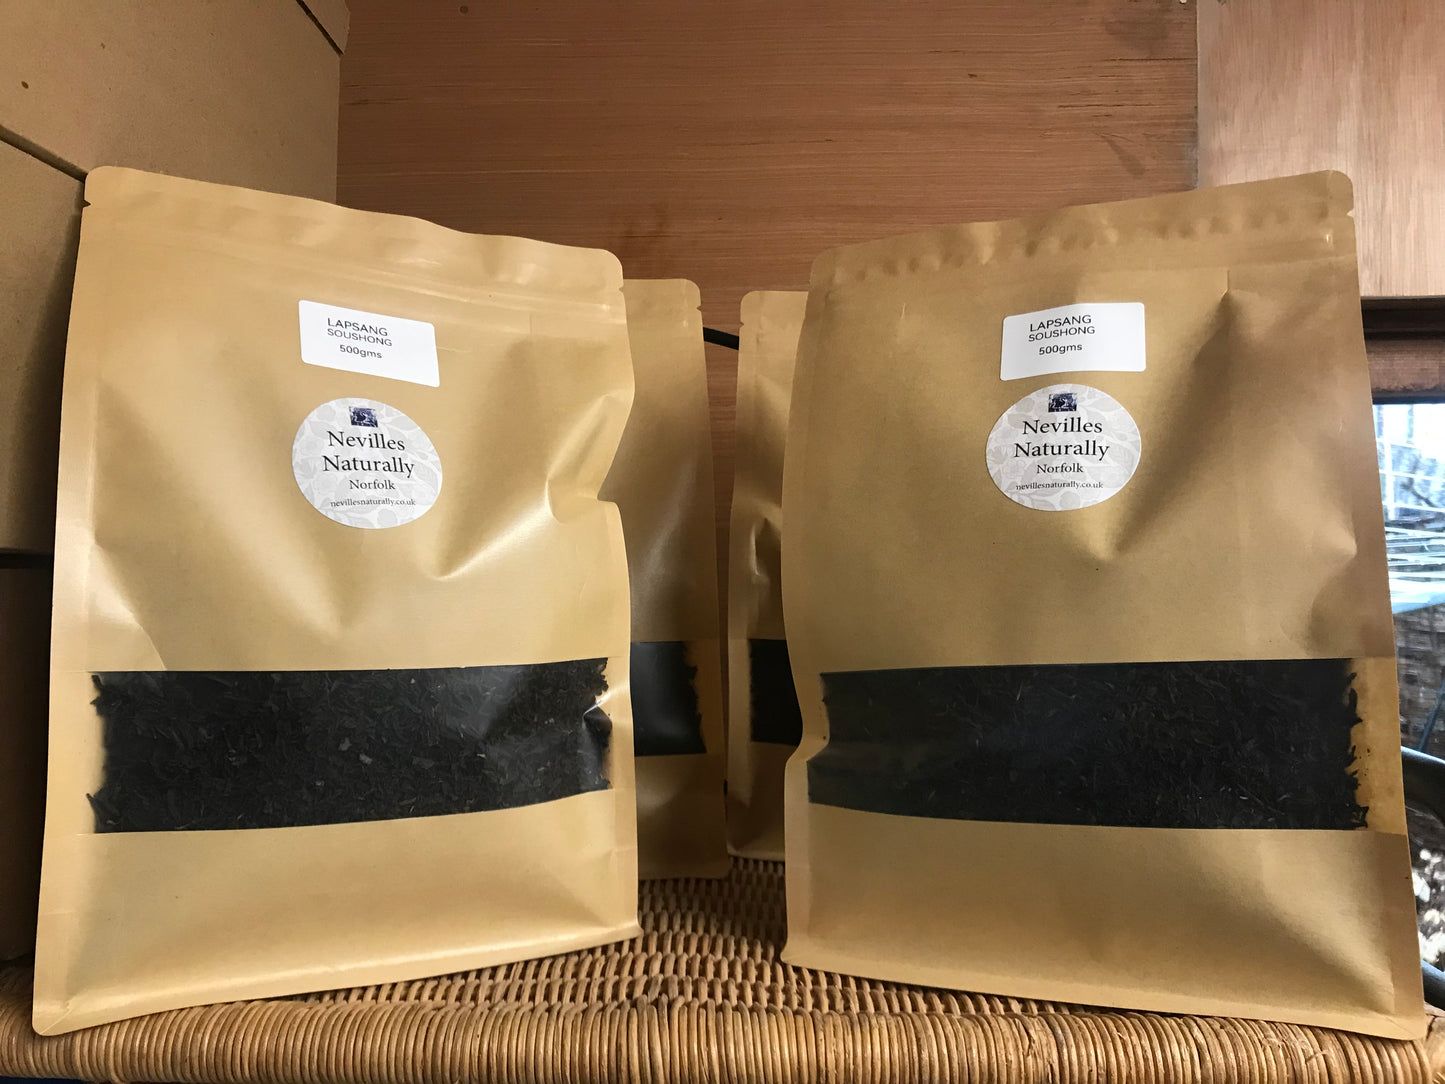 Lapsang Souchong Loose Leaf Tea in Pouch